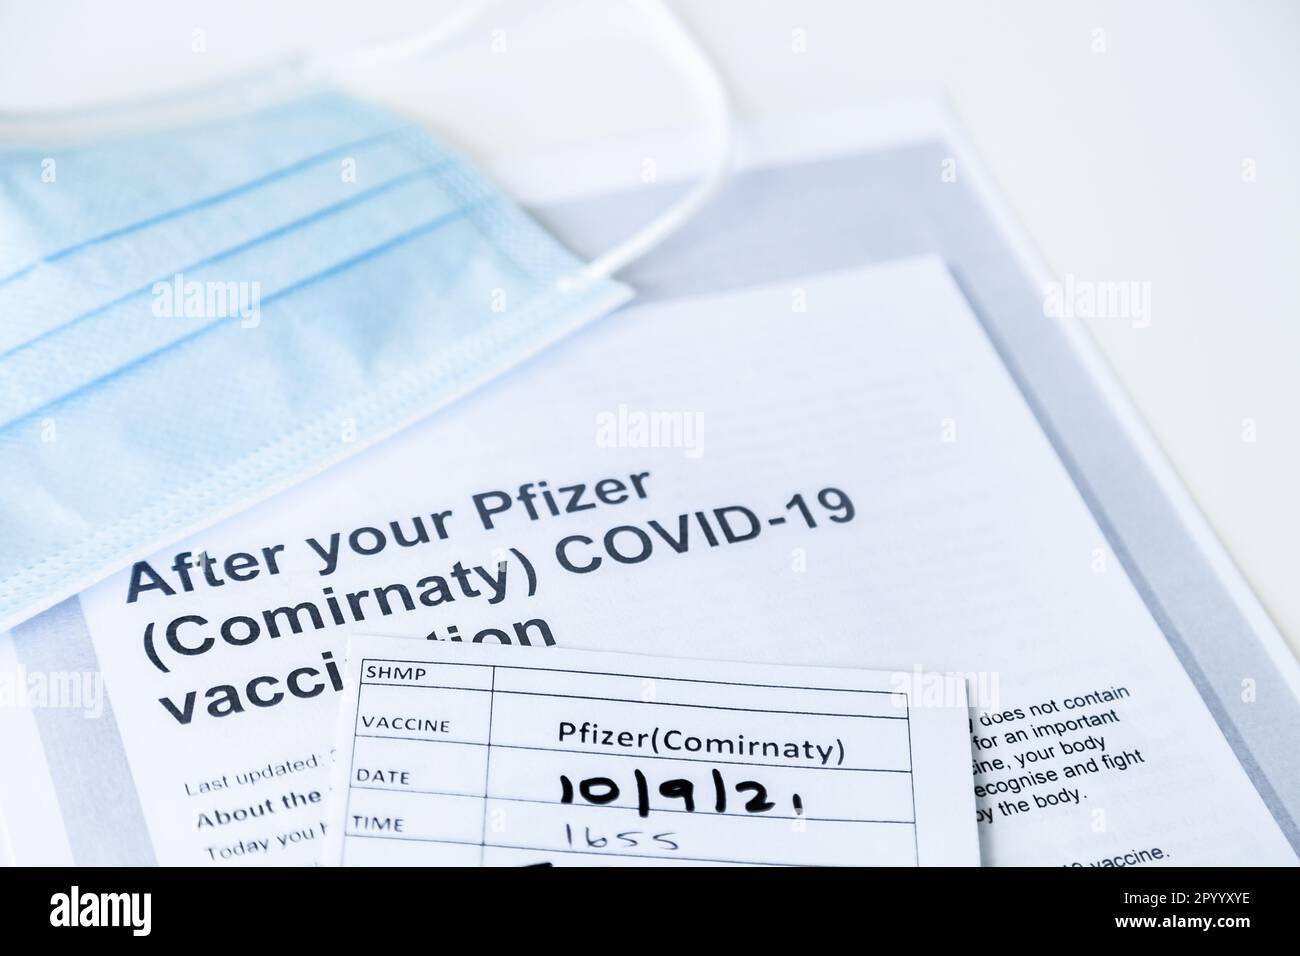 After your Pfizer (Comirnaty) COVID-19 Vaccination information sheet and medical mask Stock Photo